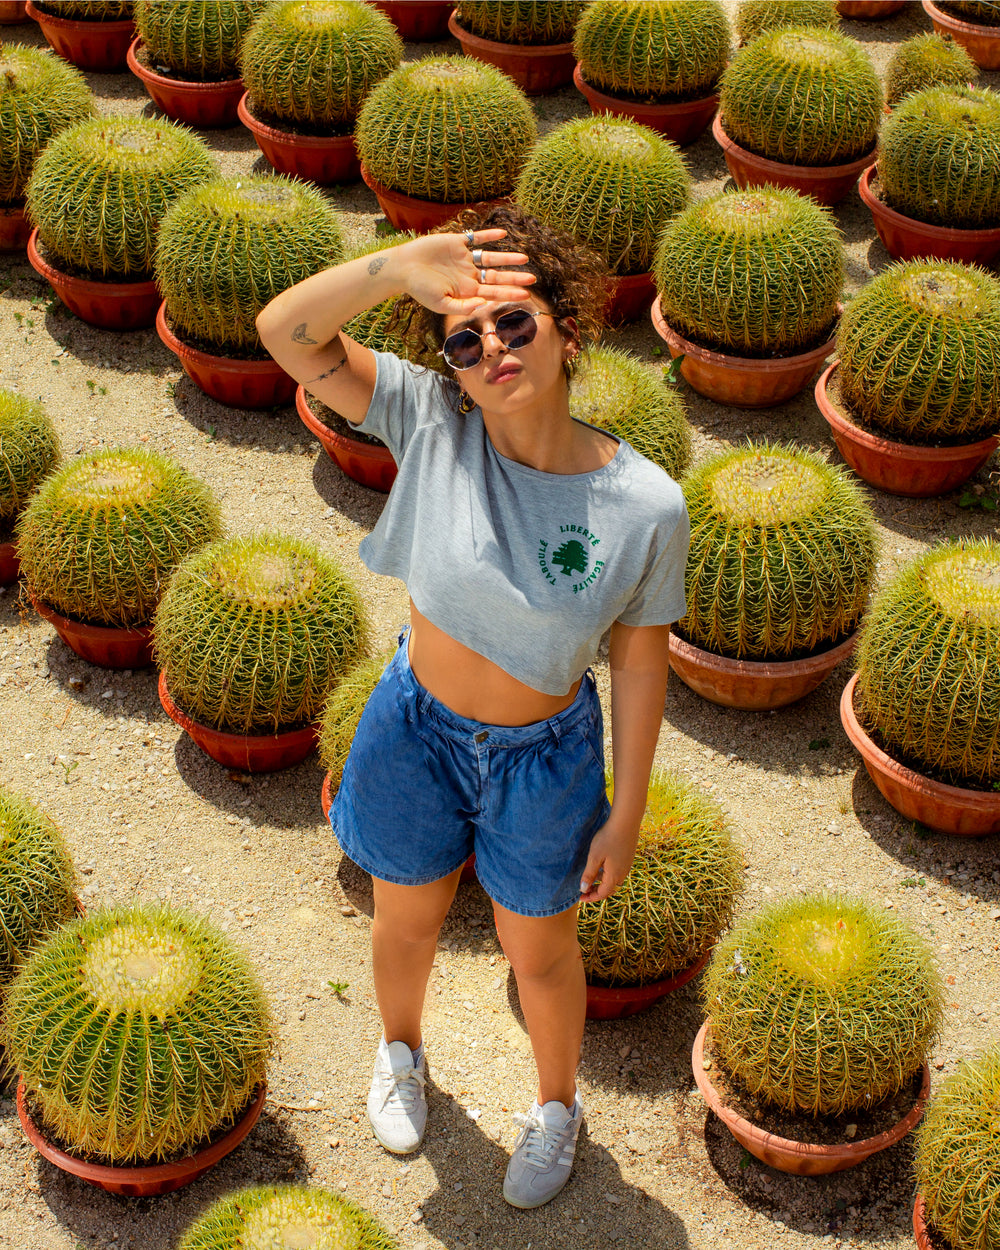 Young adult female wearing grey Crop Top with Liberté Egalité Taboulé written in French and printed in green velvet on the side of the Crop Top along with white sneakers, jeans short and sunglasses. Standing between cactuses in pots.